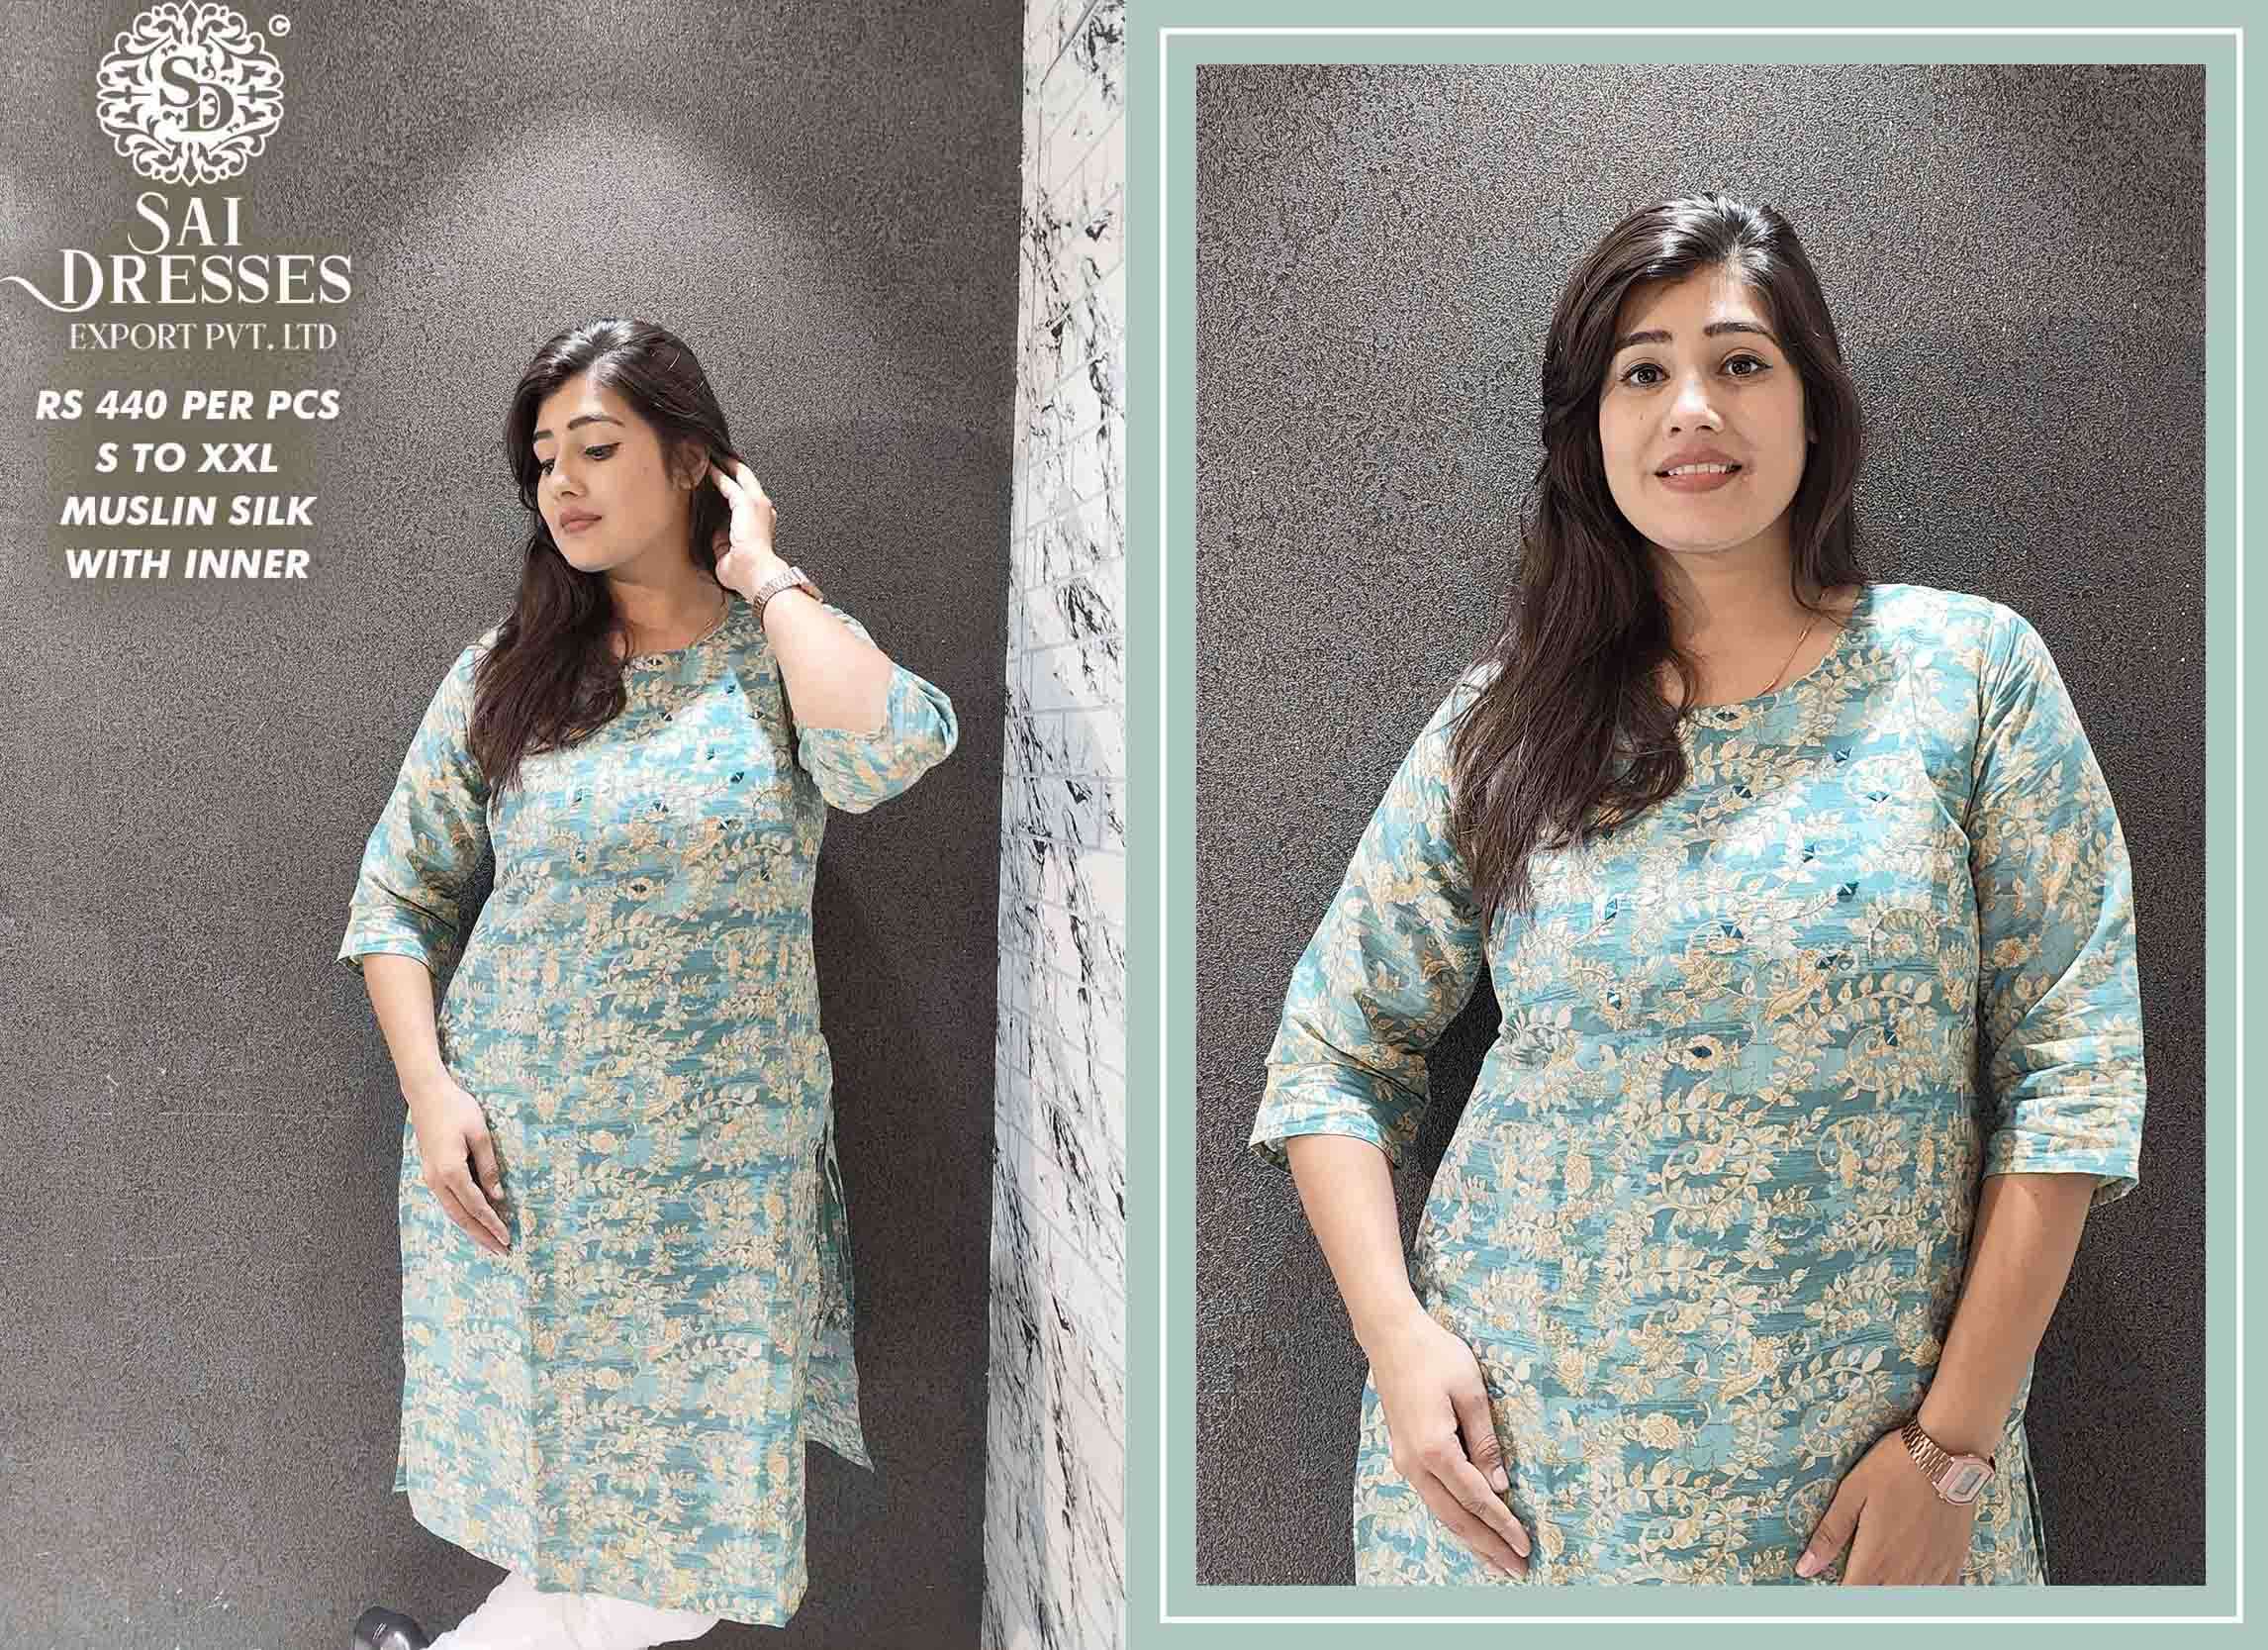 SAI DRESSES PRESENT D.NO SD42 READY TO WEAR DIGITAL PRINTED KURTI COMBO COLLECTION IN WHOLESALE RATE IN SURAT